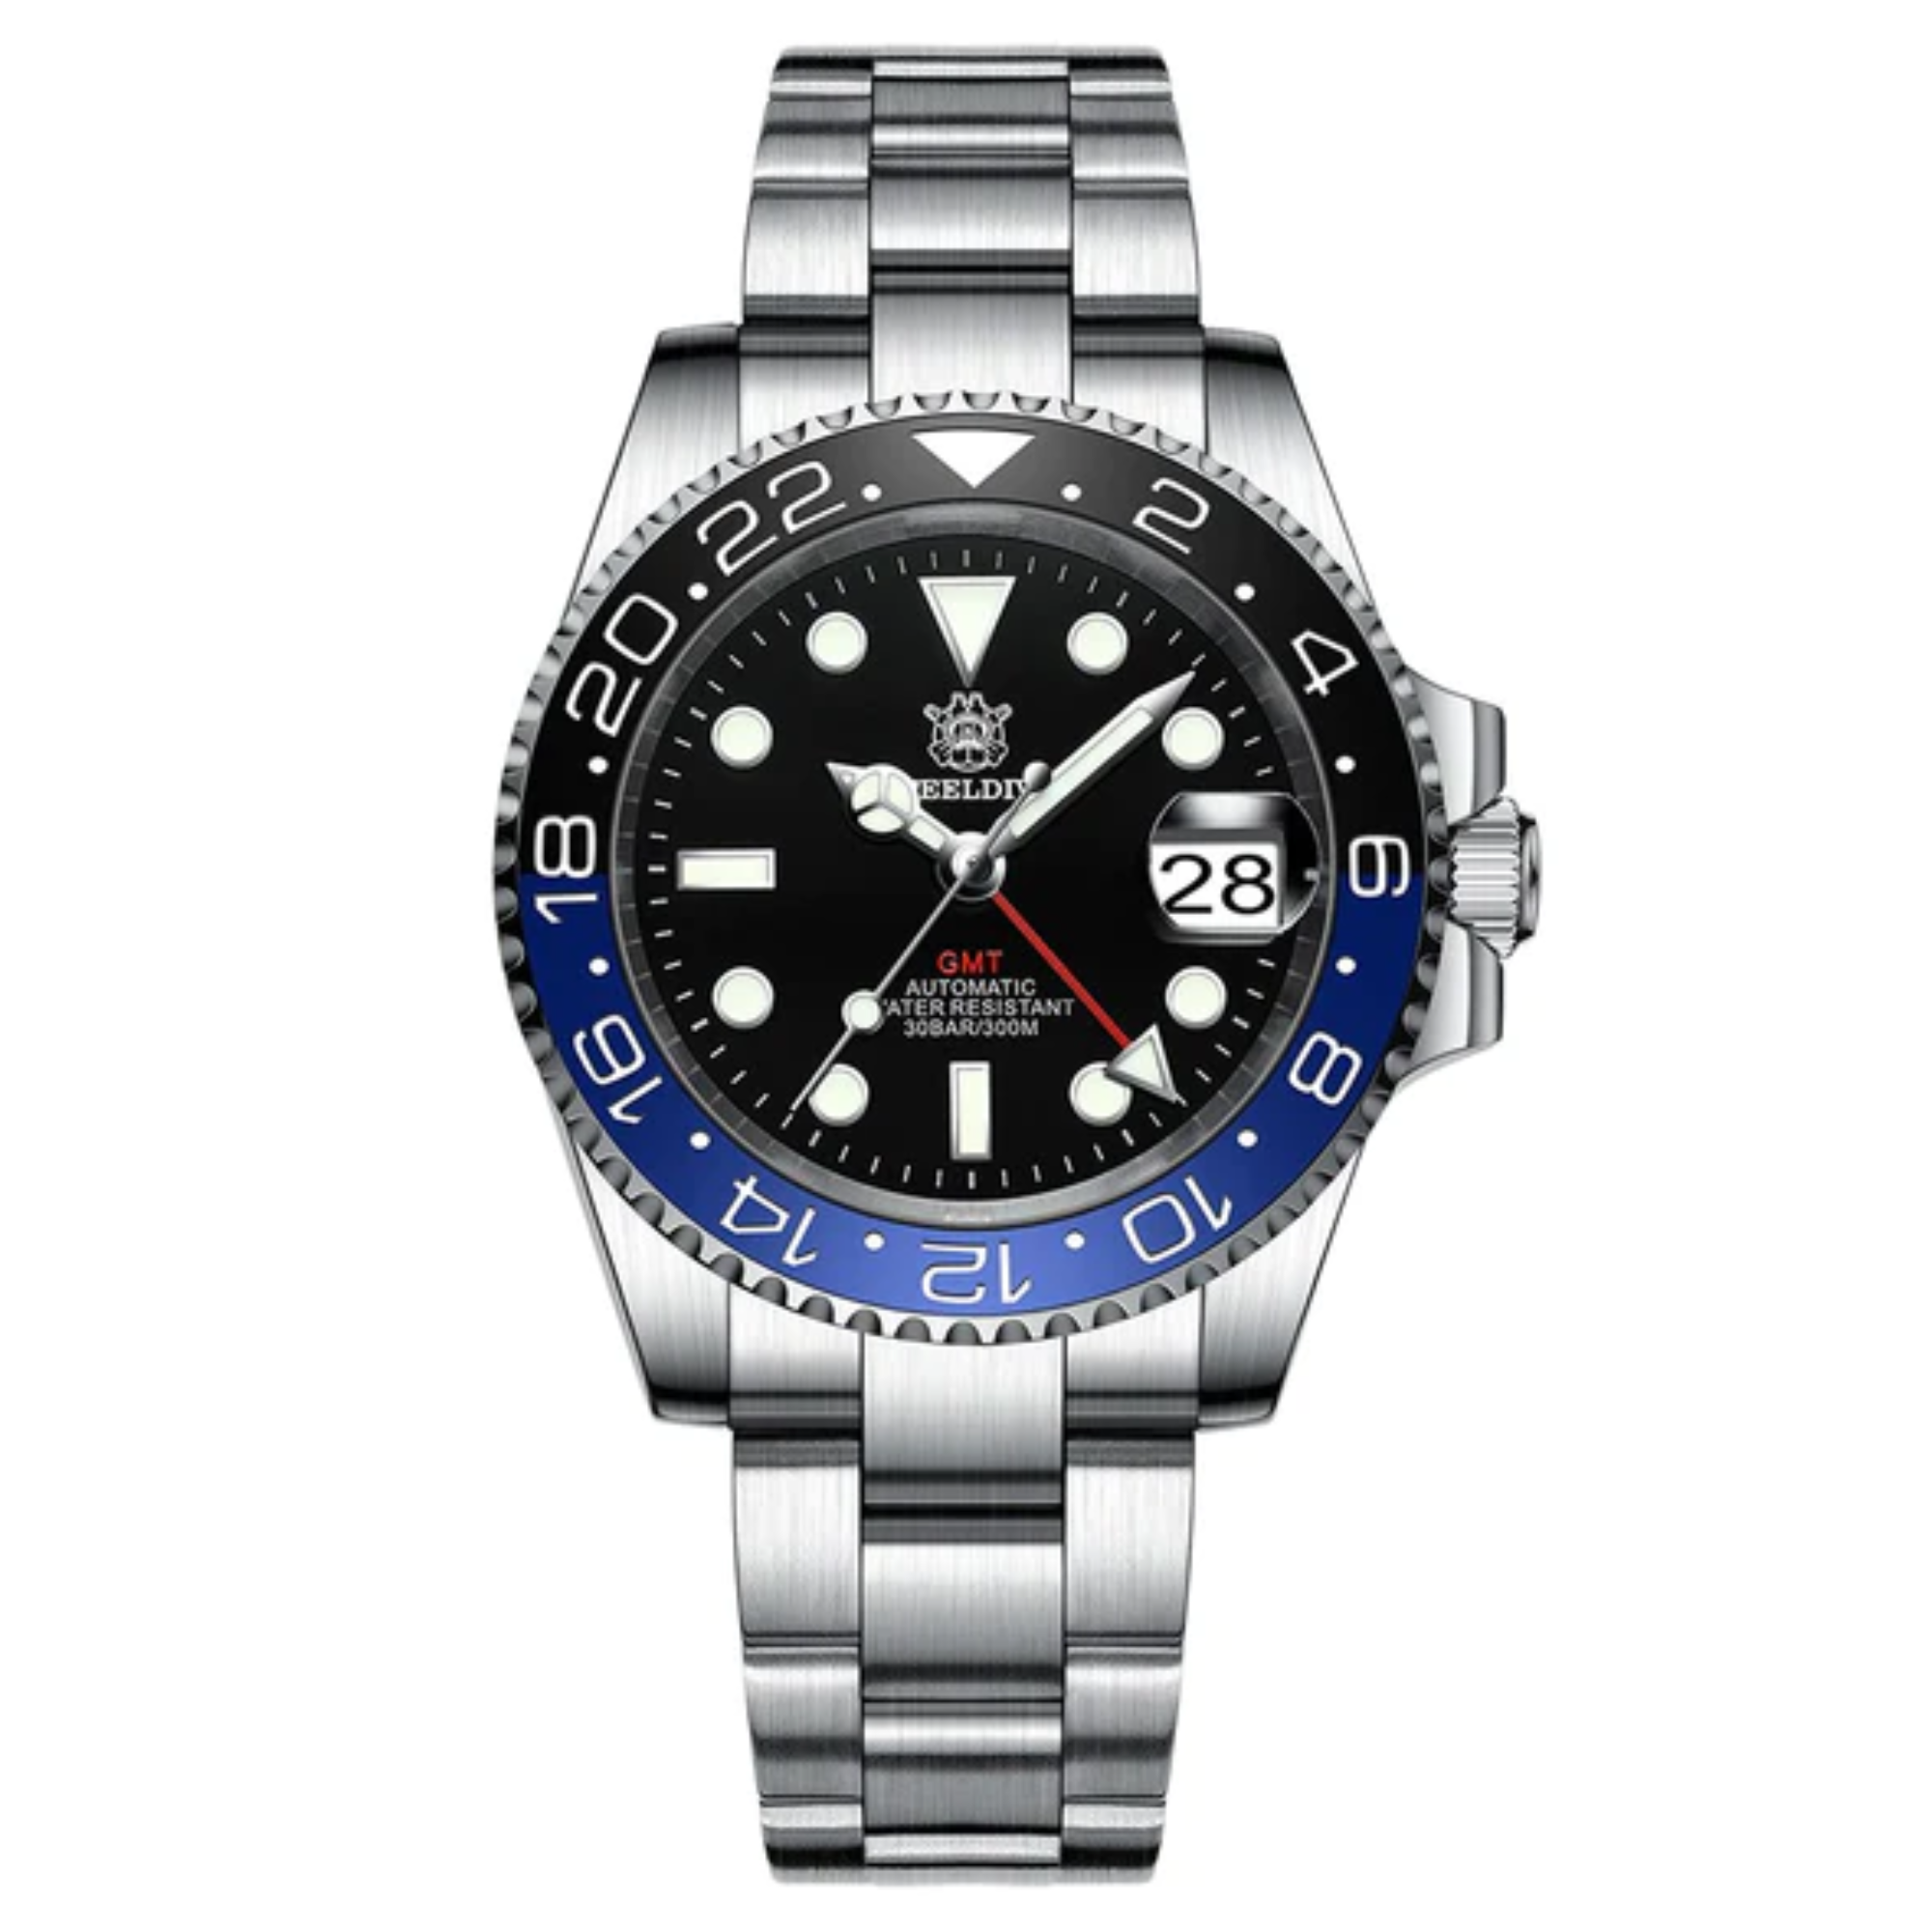 Steeldive SD1993 NH34 GMT Automatic Watch V2 Blue/Black Dial With Oyster Bracelet